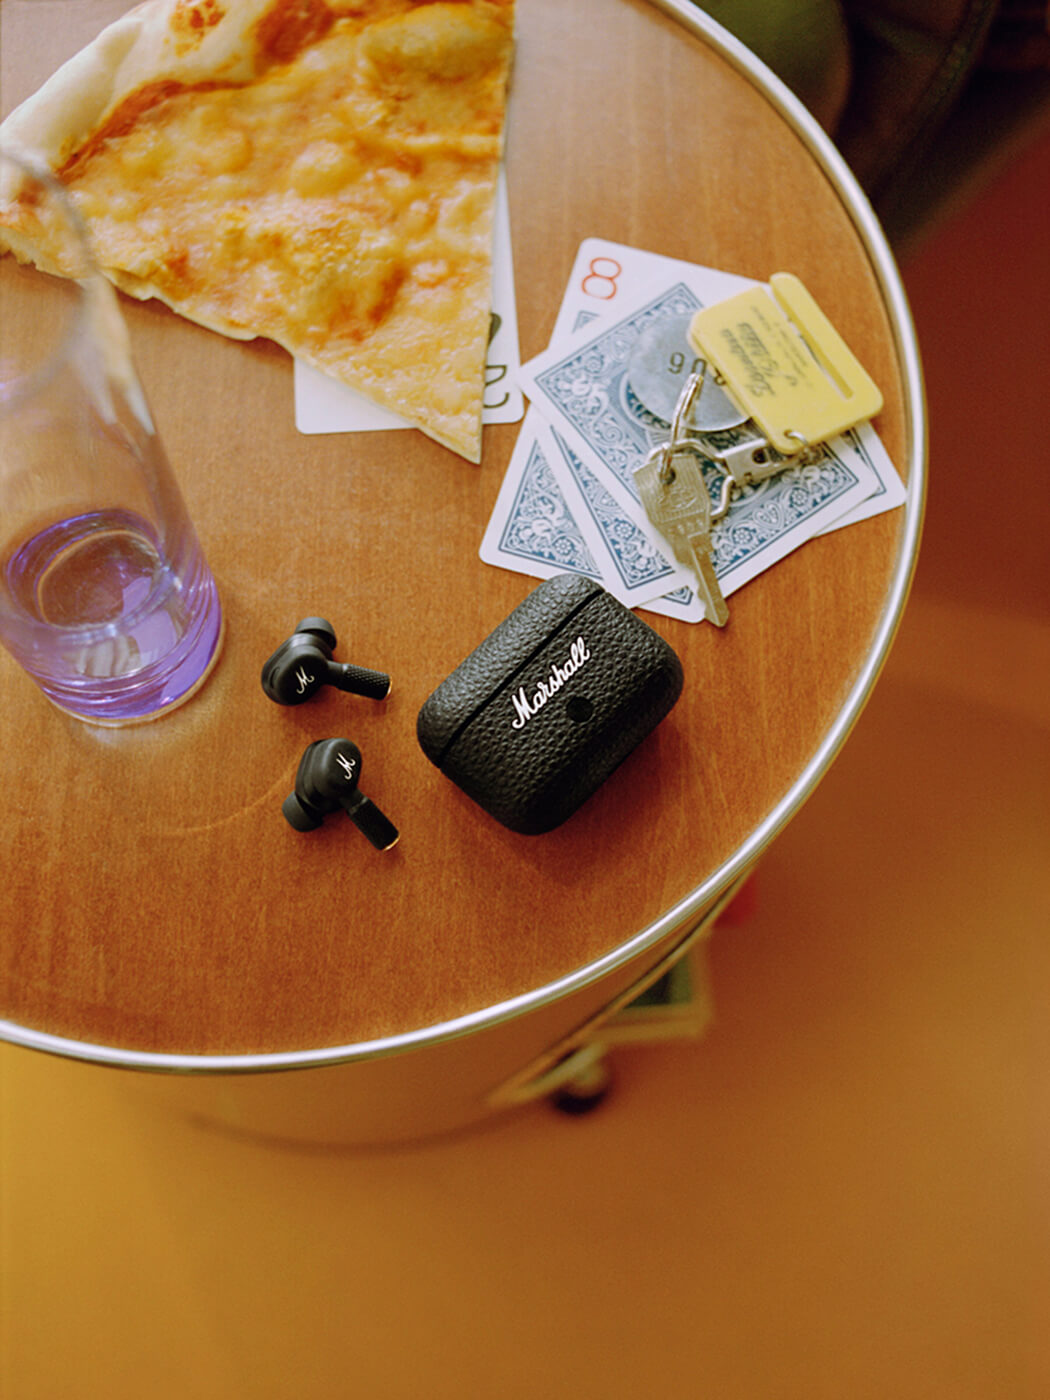 The Motif II ANC earbuds and their case on a coffee table, photo by Kevin Castanheira